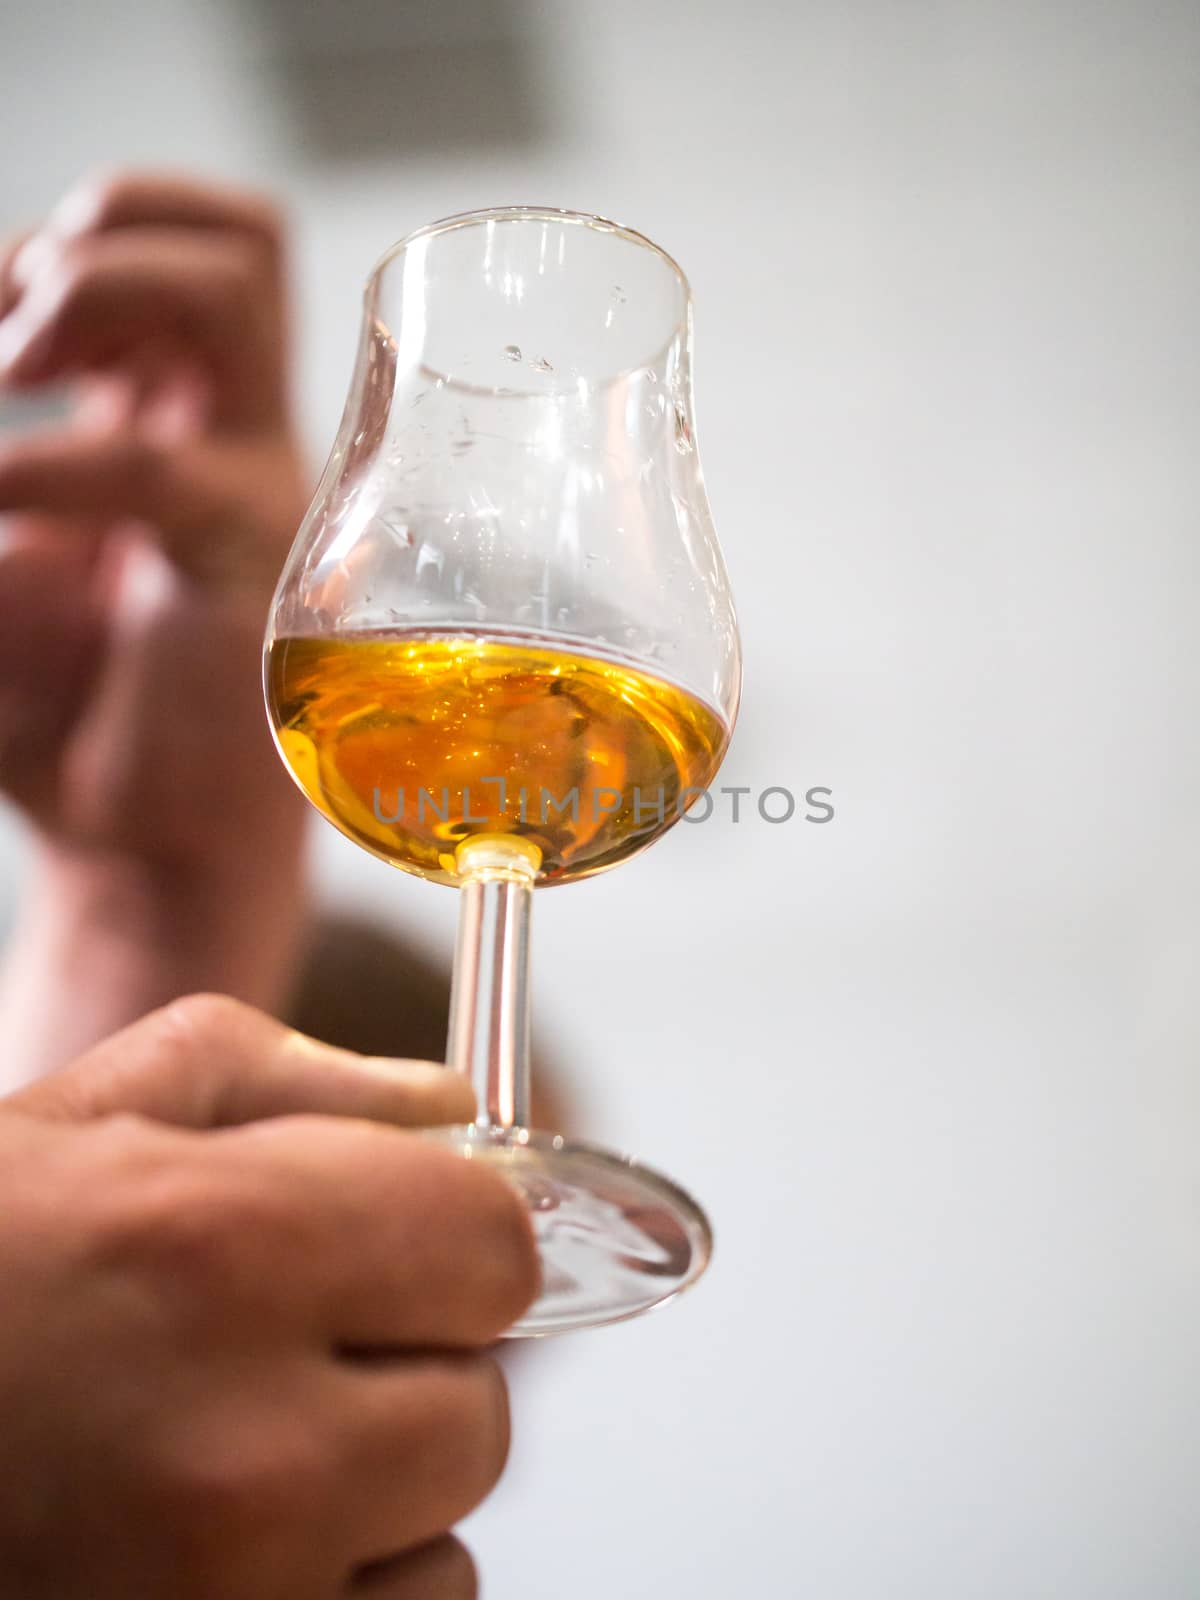 Hand holding a snifter glass filled with whisky by Alex_L